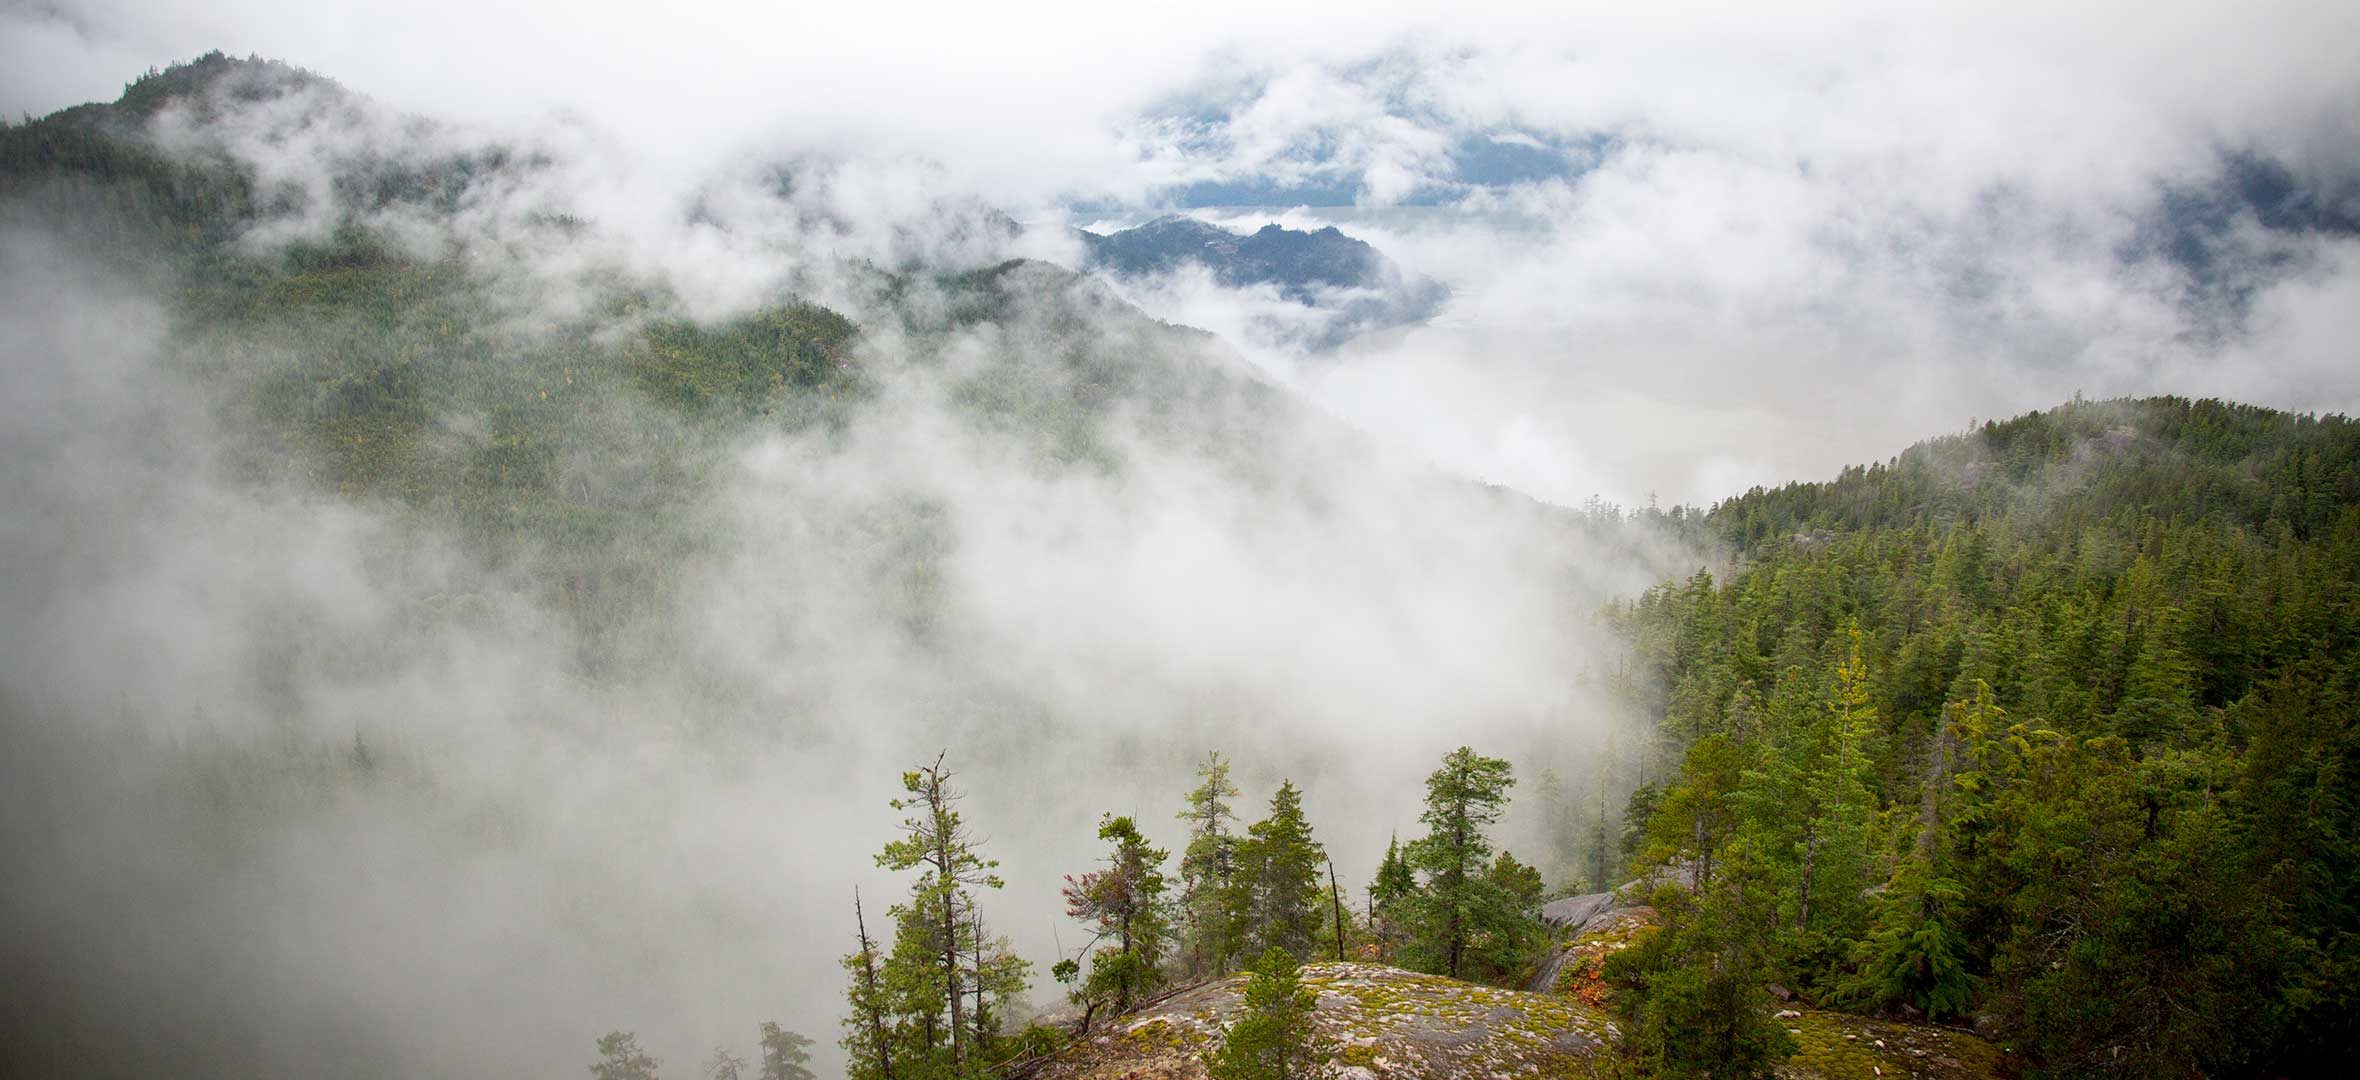 A landscape view of Howe Sound